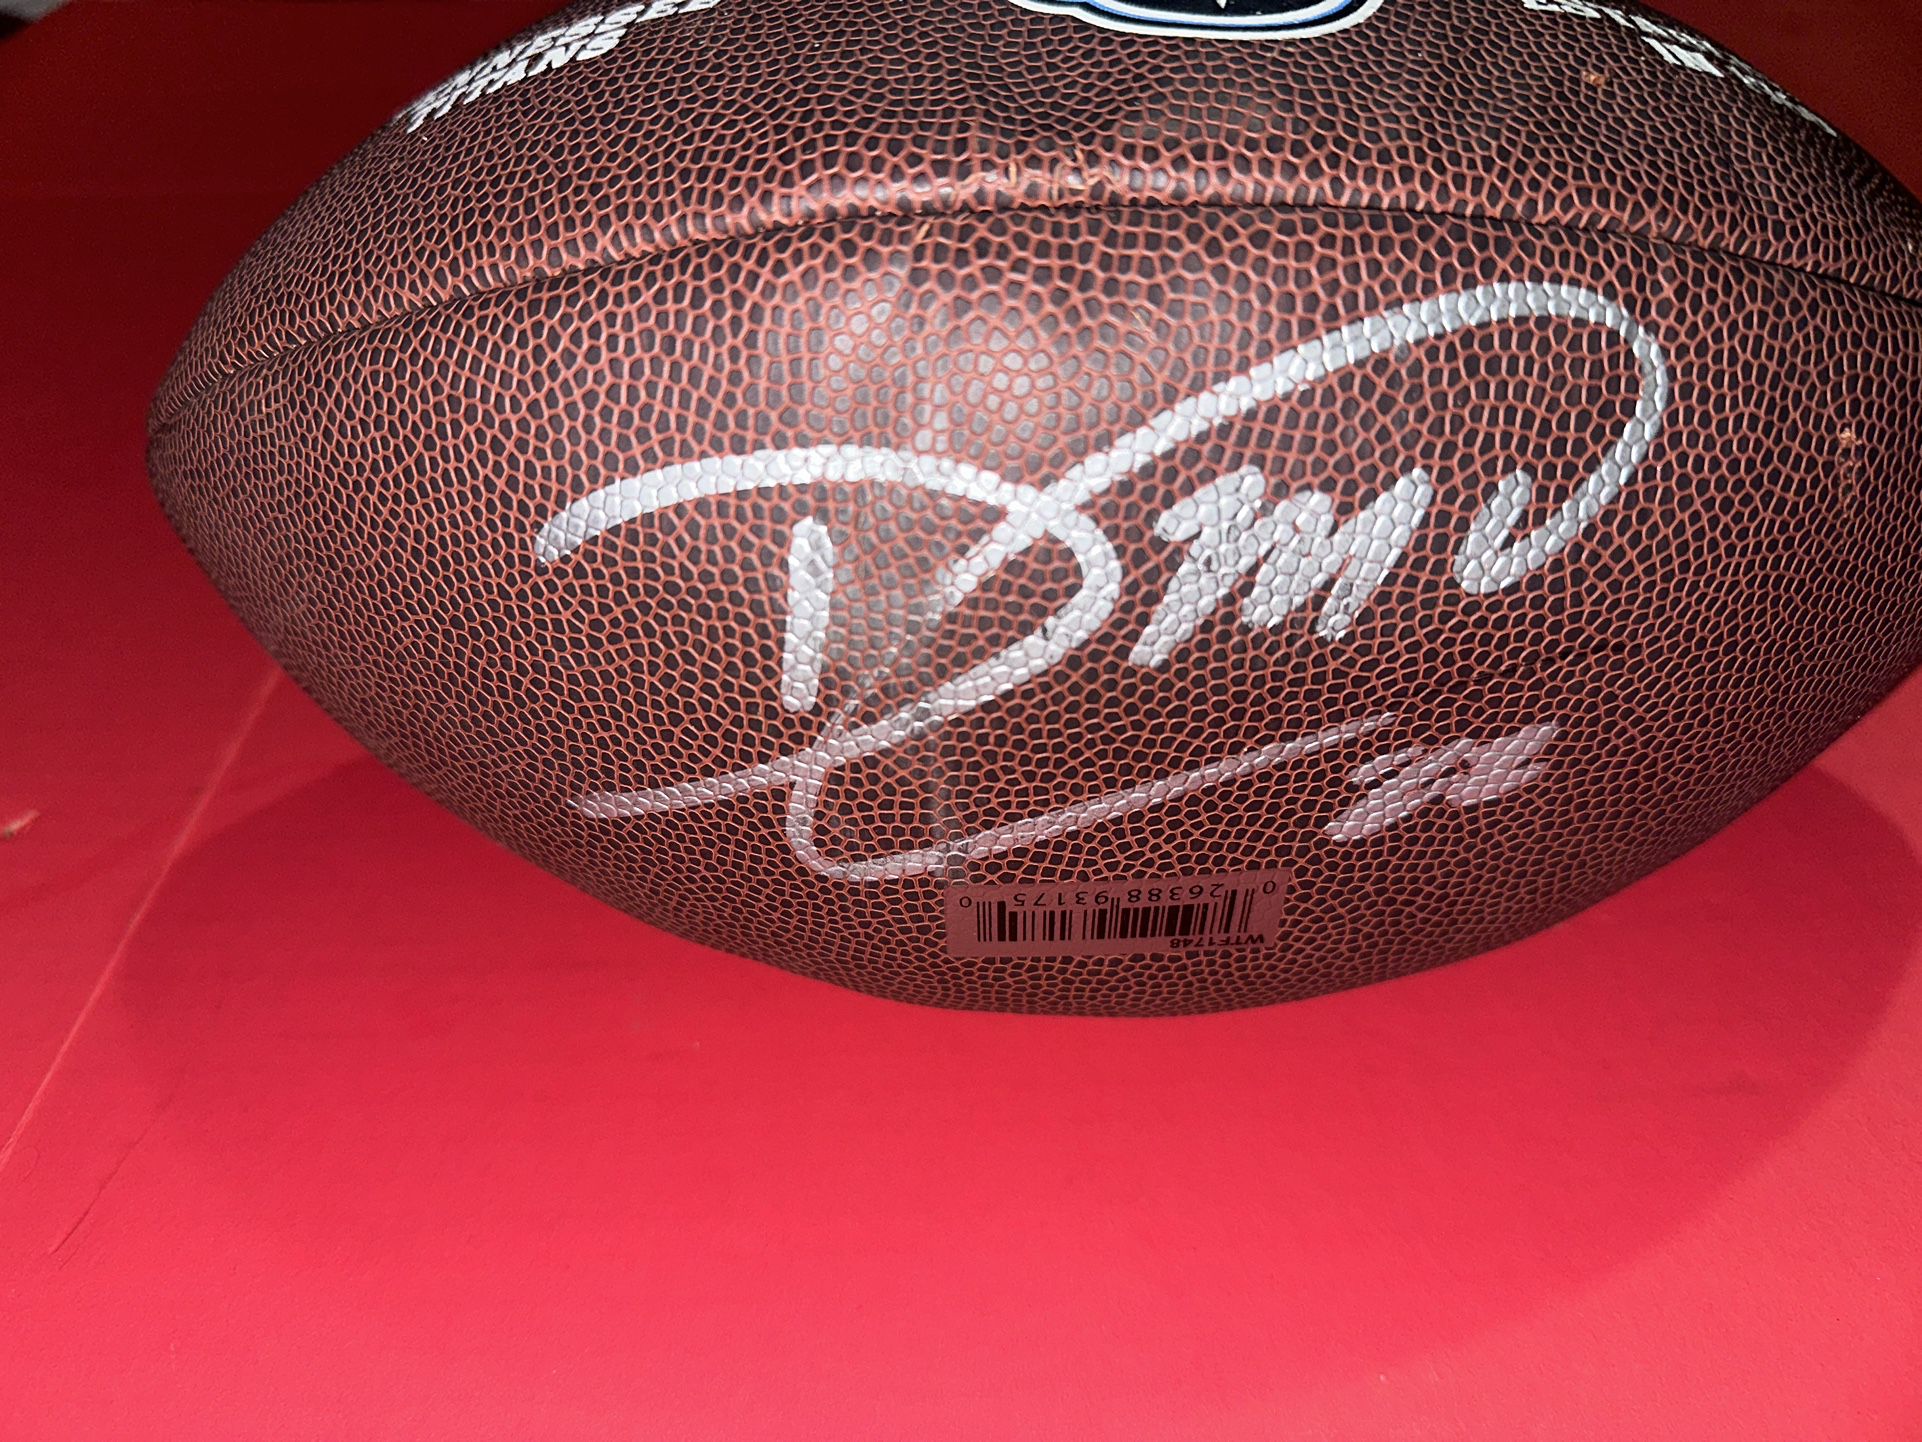 dexter mccluster autographed football Tennessee Titans